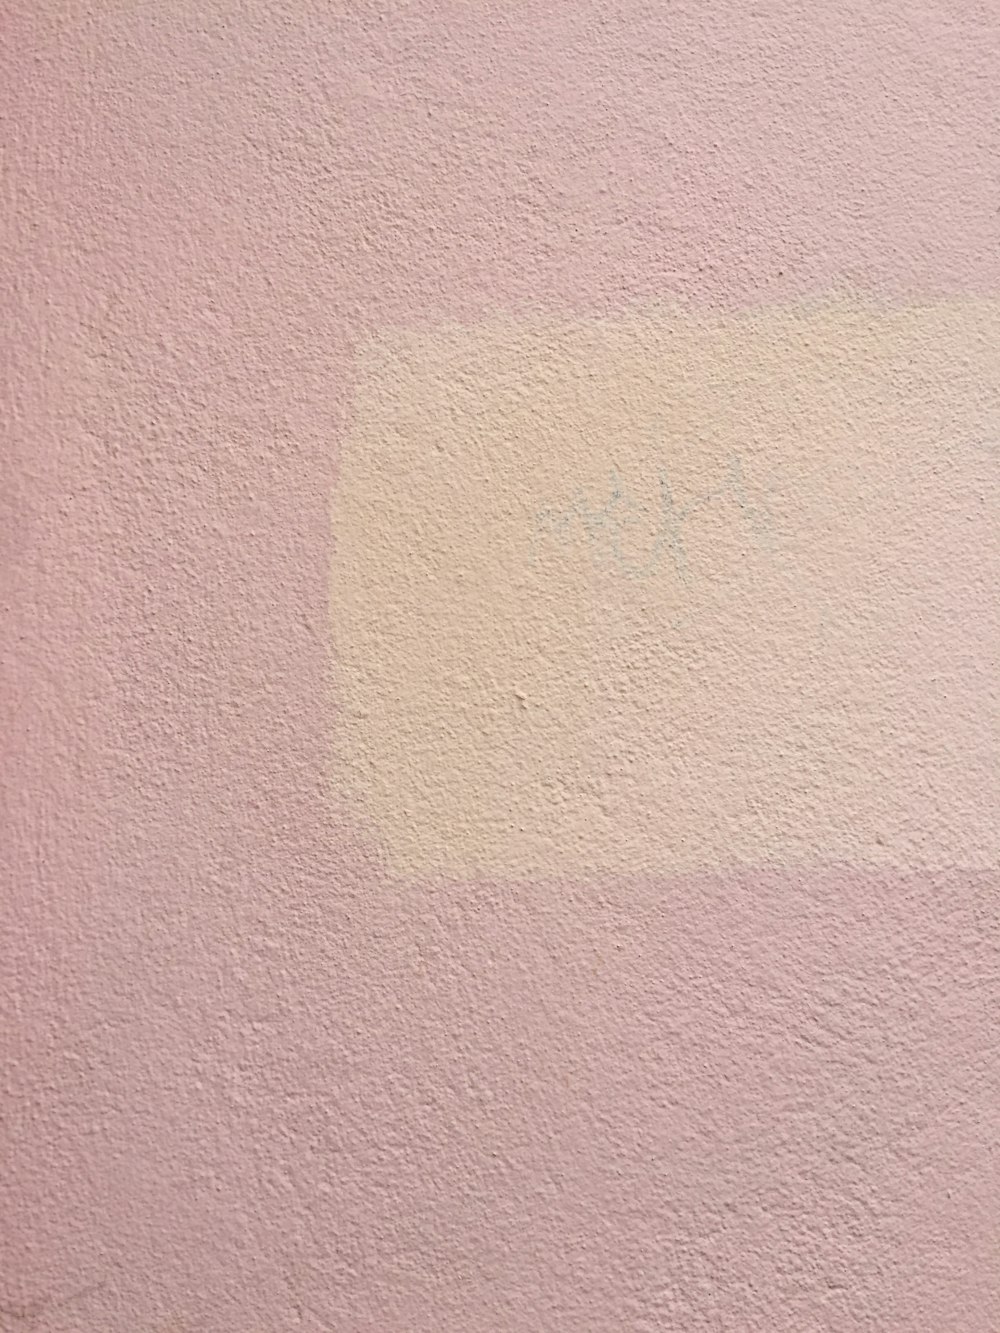 A close up of a pink paper texture photo – Free Pink paper Image on Unsplash